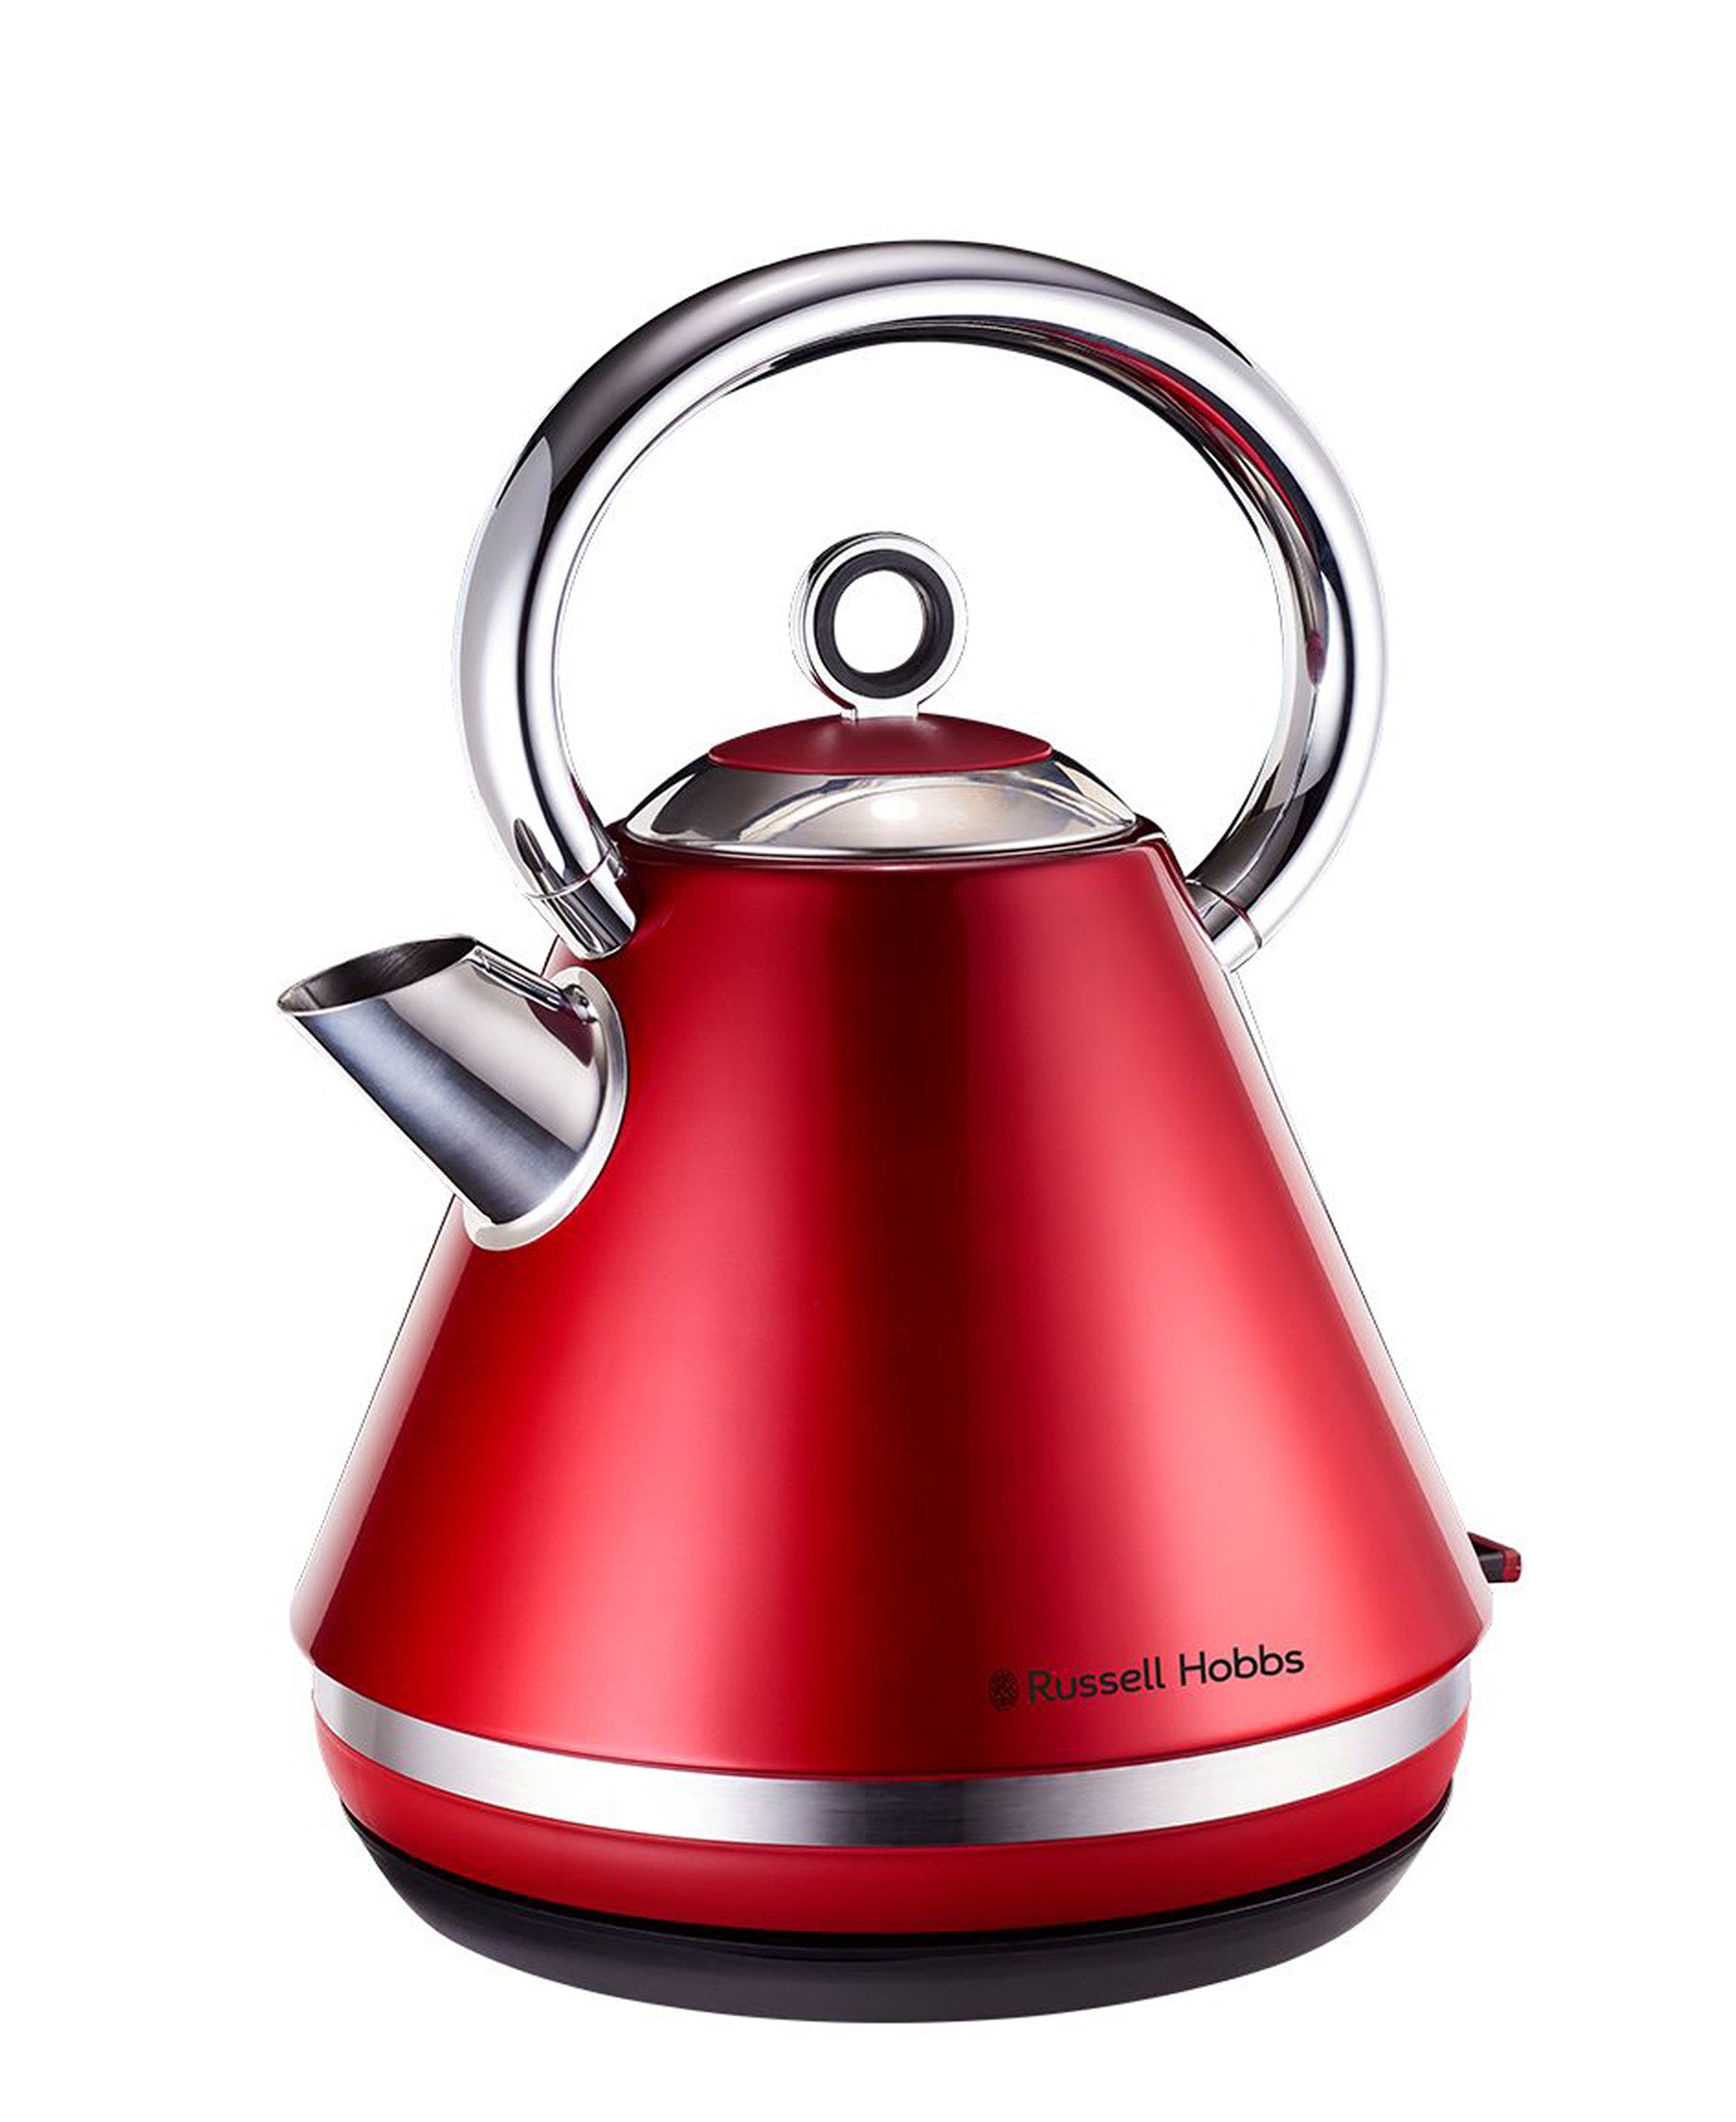 Russell Hobbs 1.7L Legacy Kettle - Red